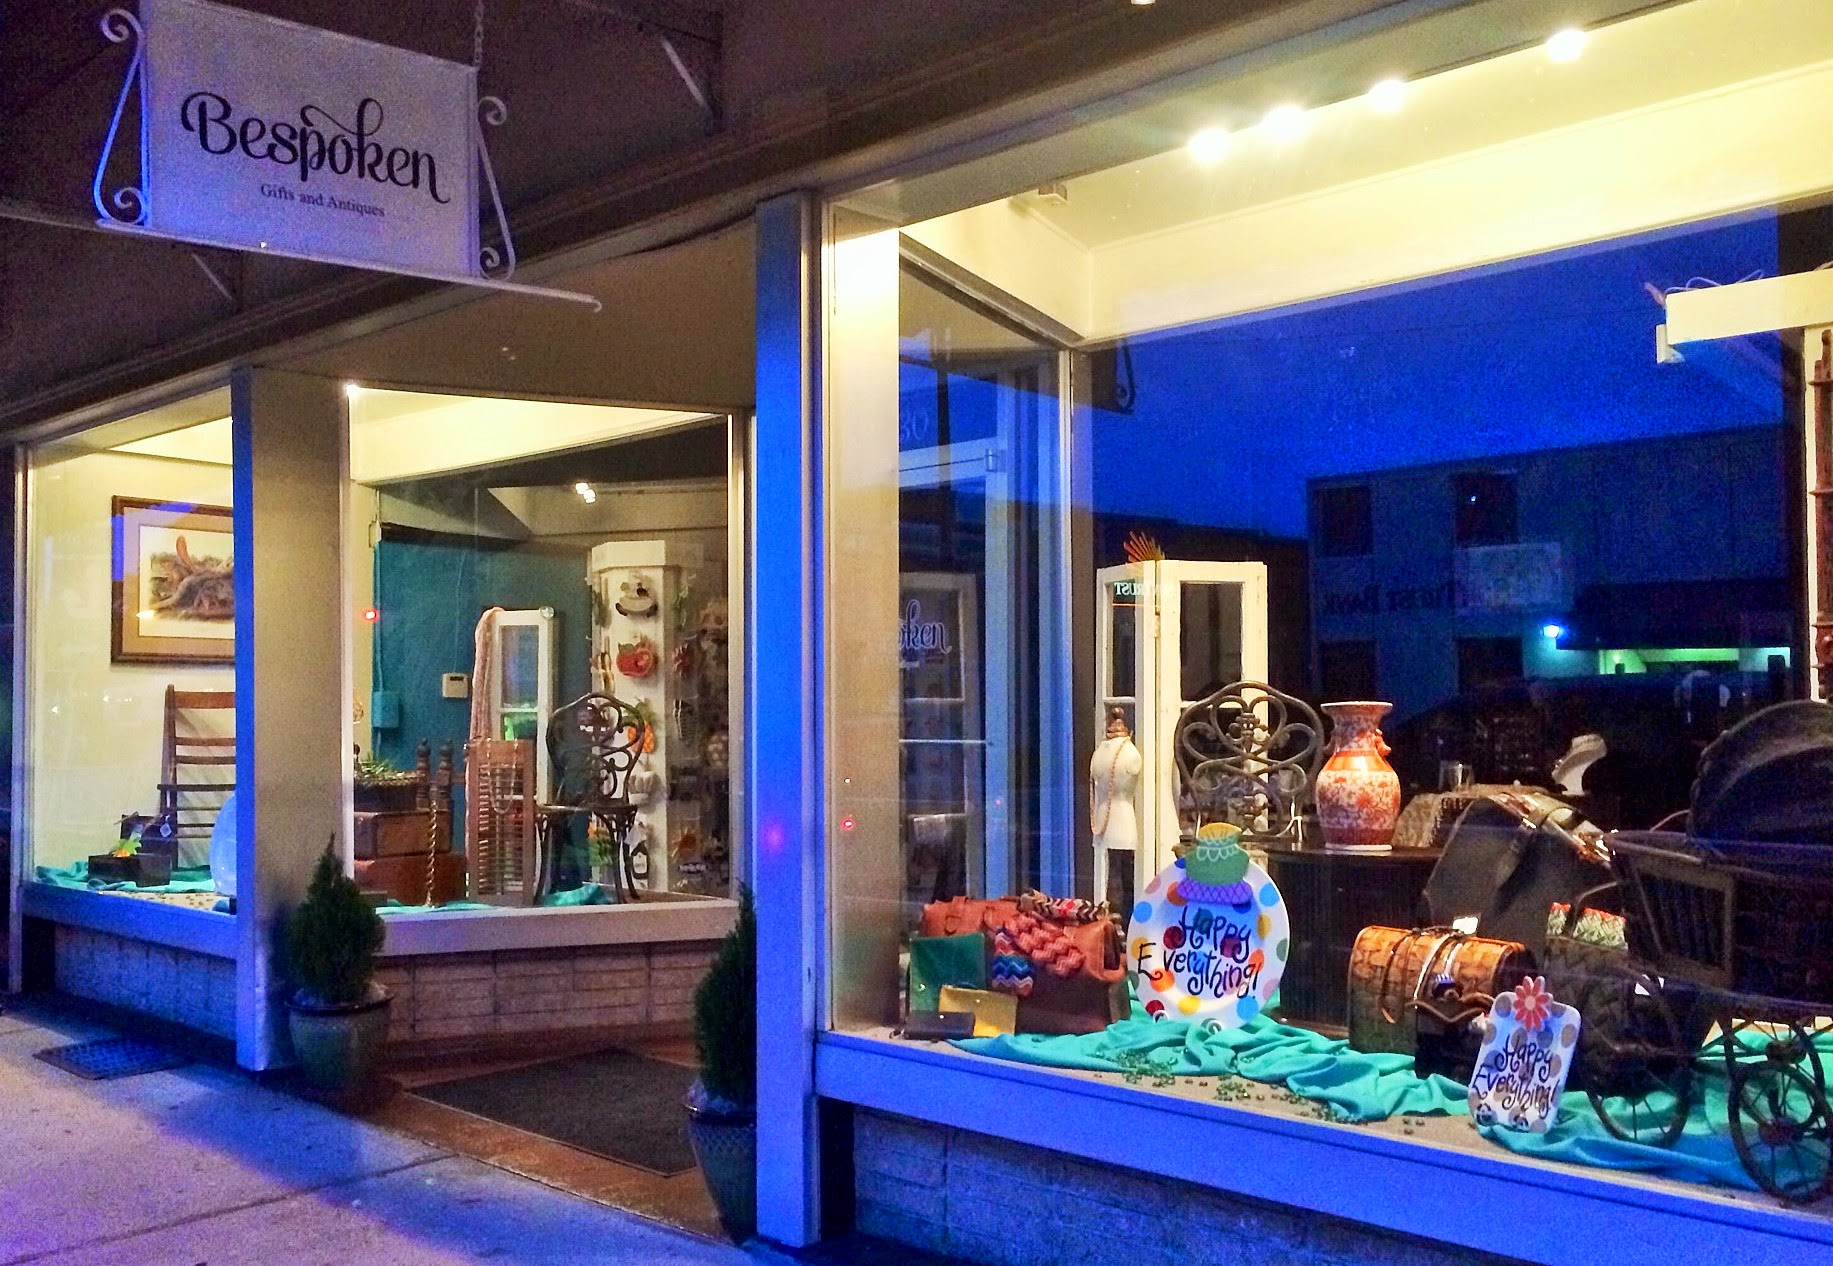 Bespoken Gifts and Antiques